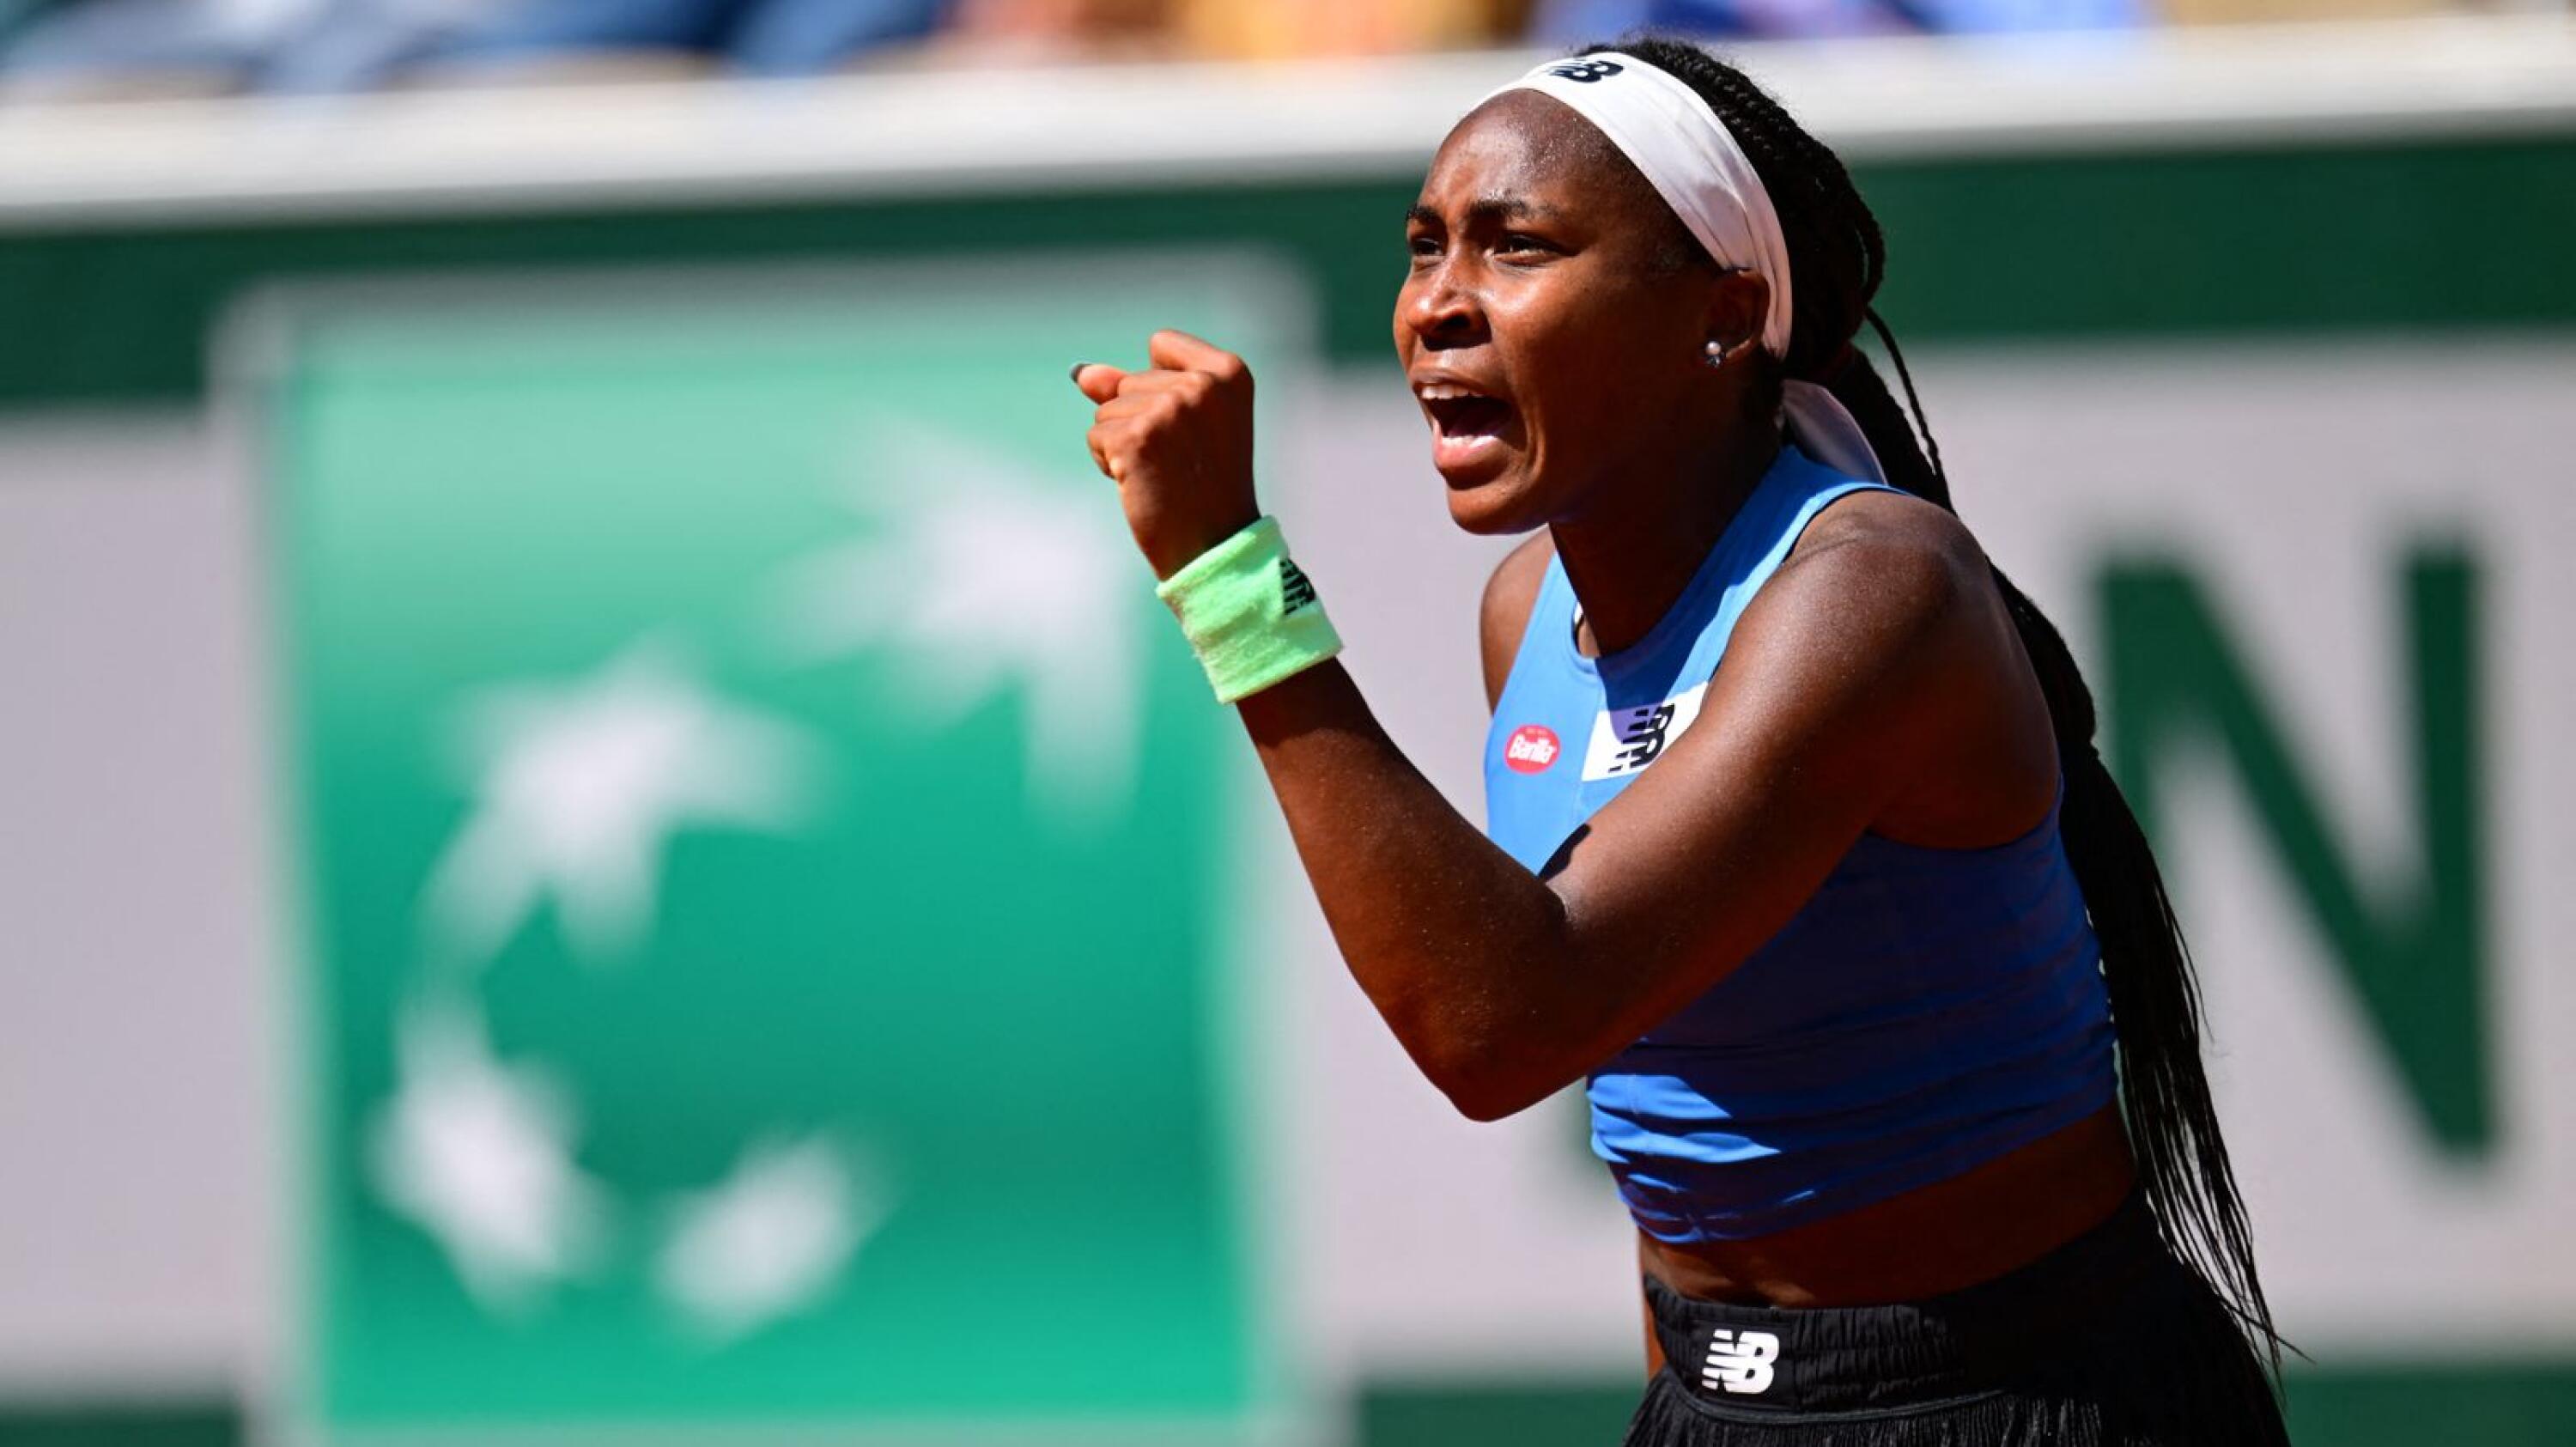 United States’ Coco Gauff celebrates after winning against Russia's Mirra Andreeva during their women's singles match on day seven of the Roland-Garros Open tennis tournament at the Court Suzanne-Lenglen in Paris on Saturday